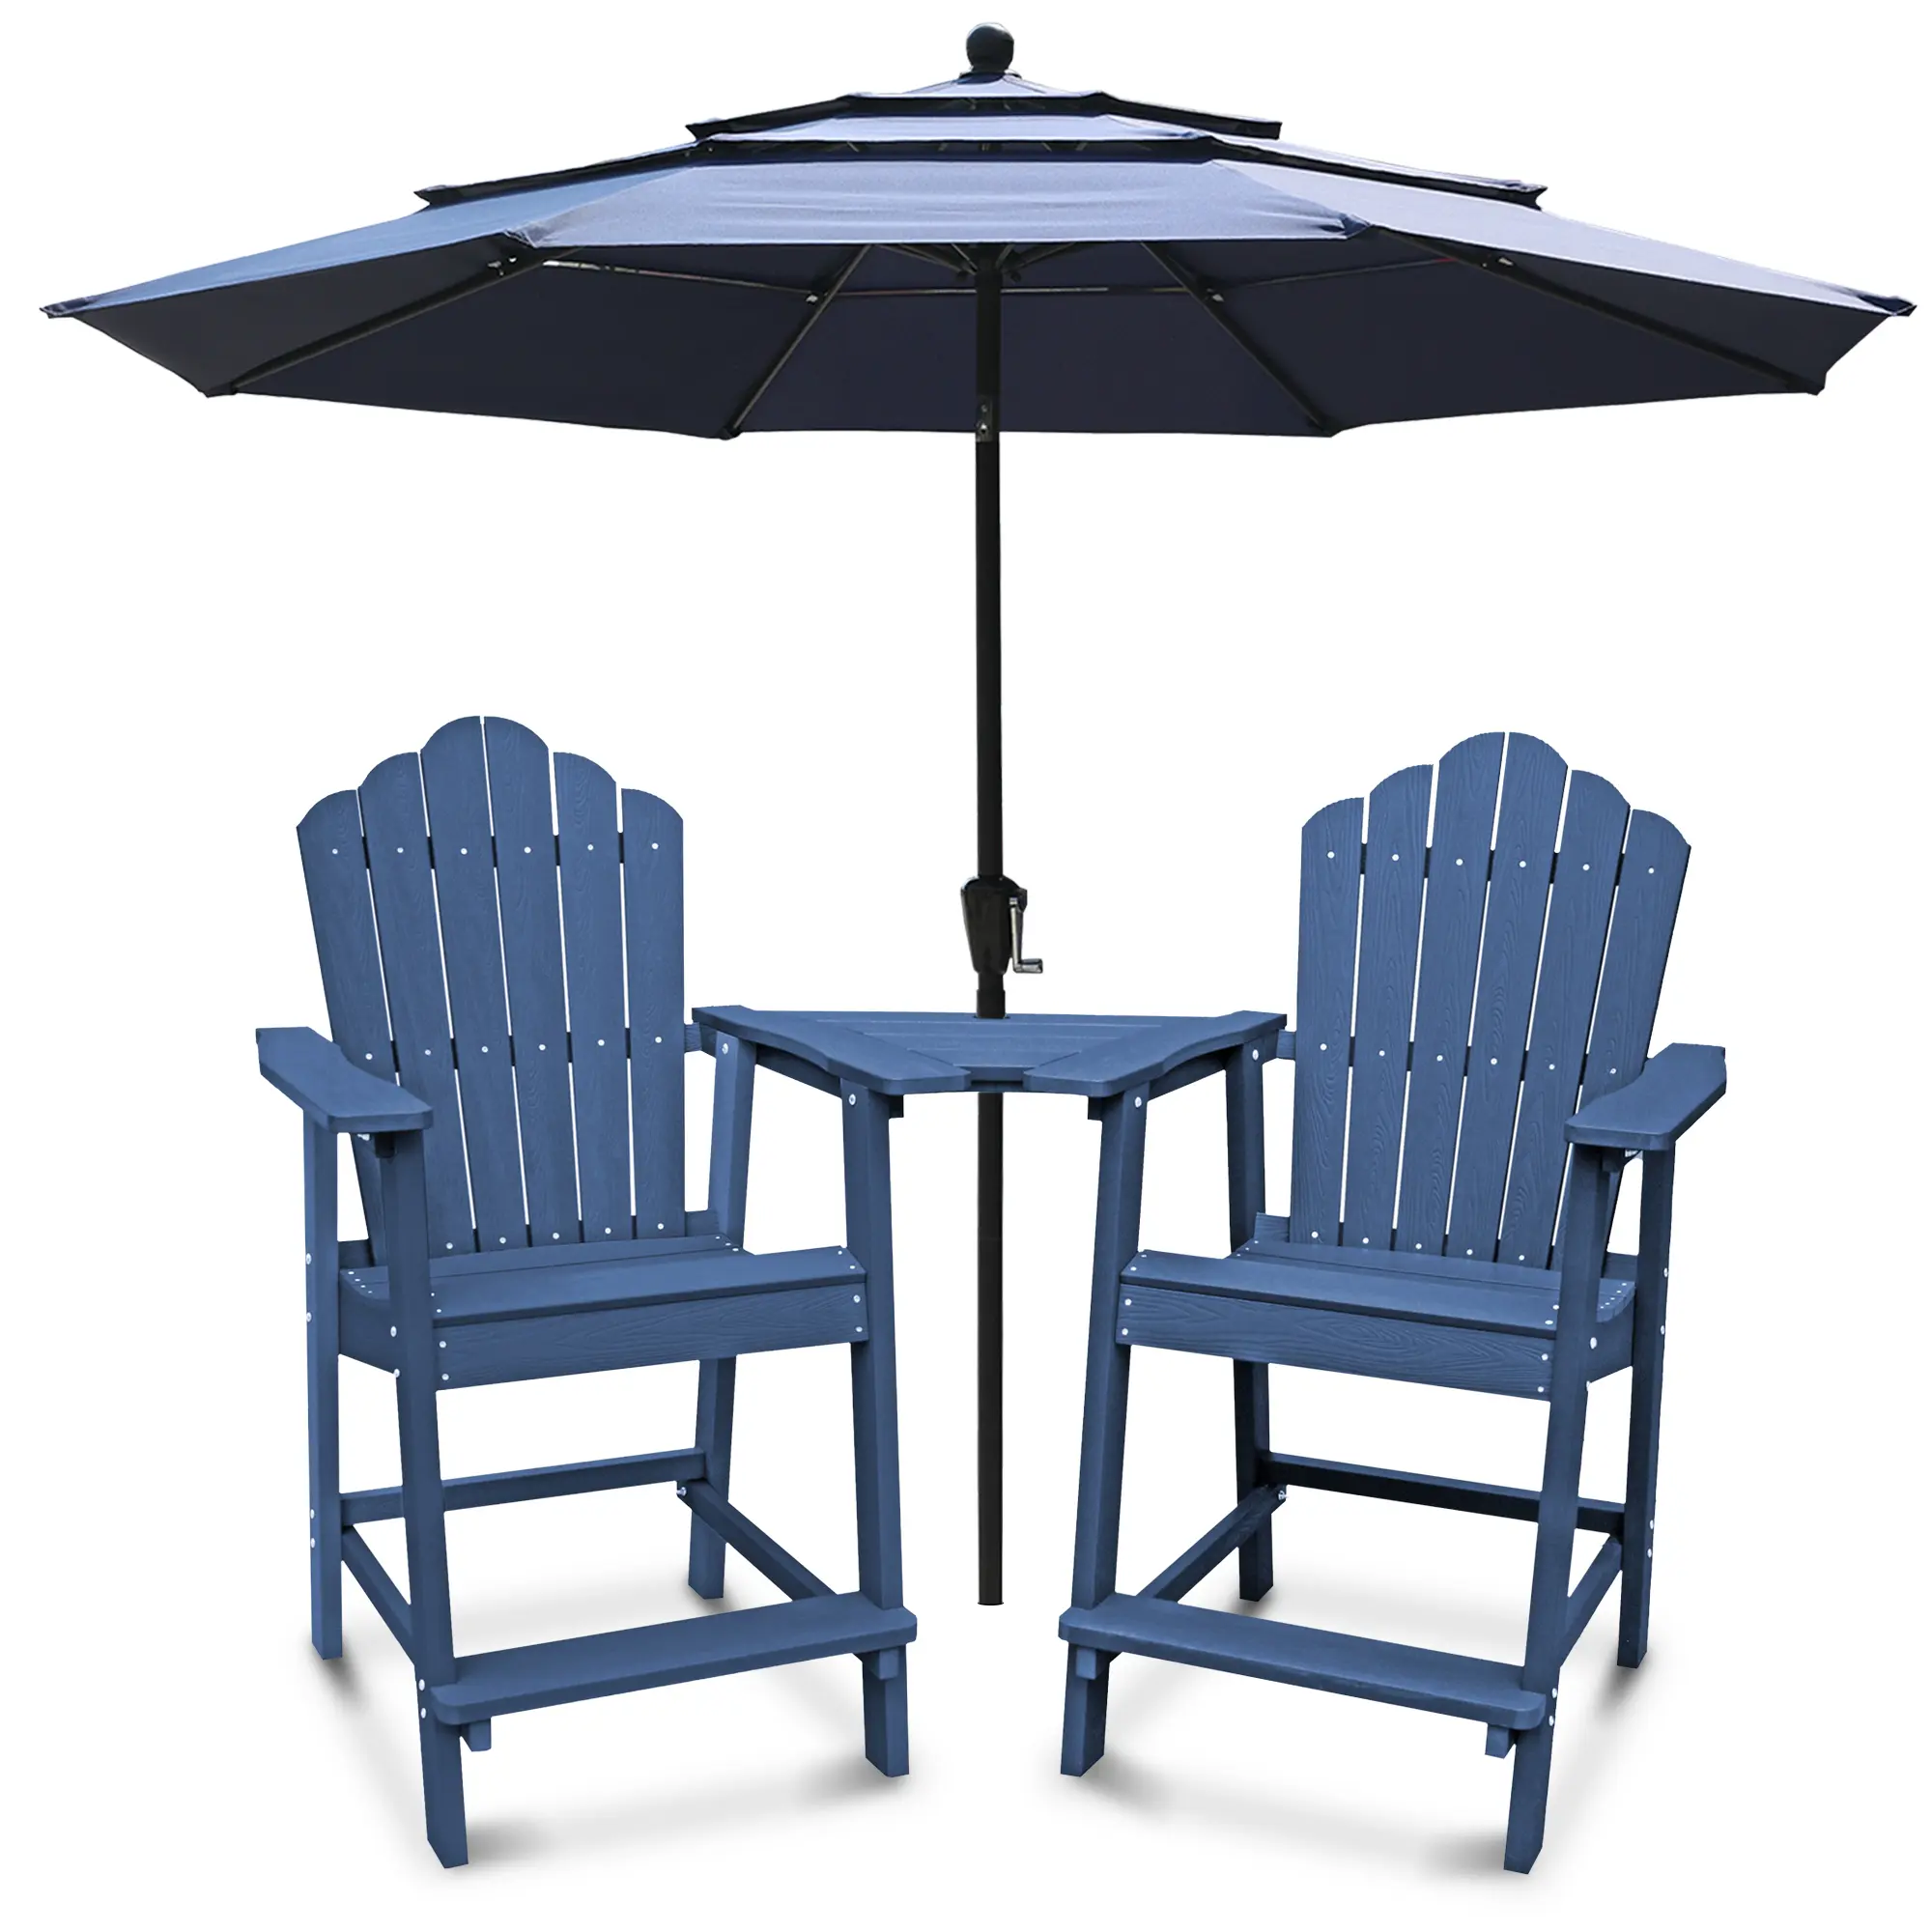 4-Piece HIPS Barstool Adirondack Chair with Tray Set and 10ft Patio Umbrella